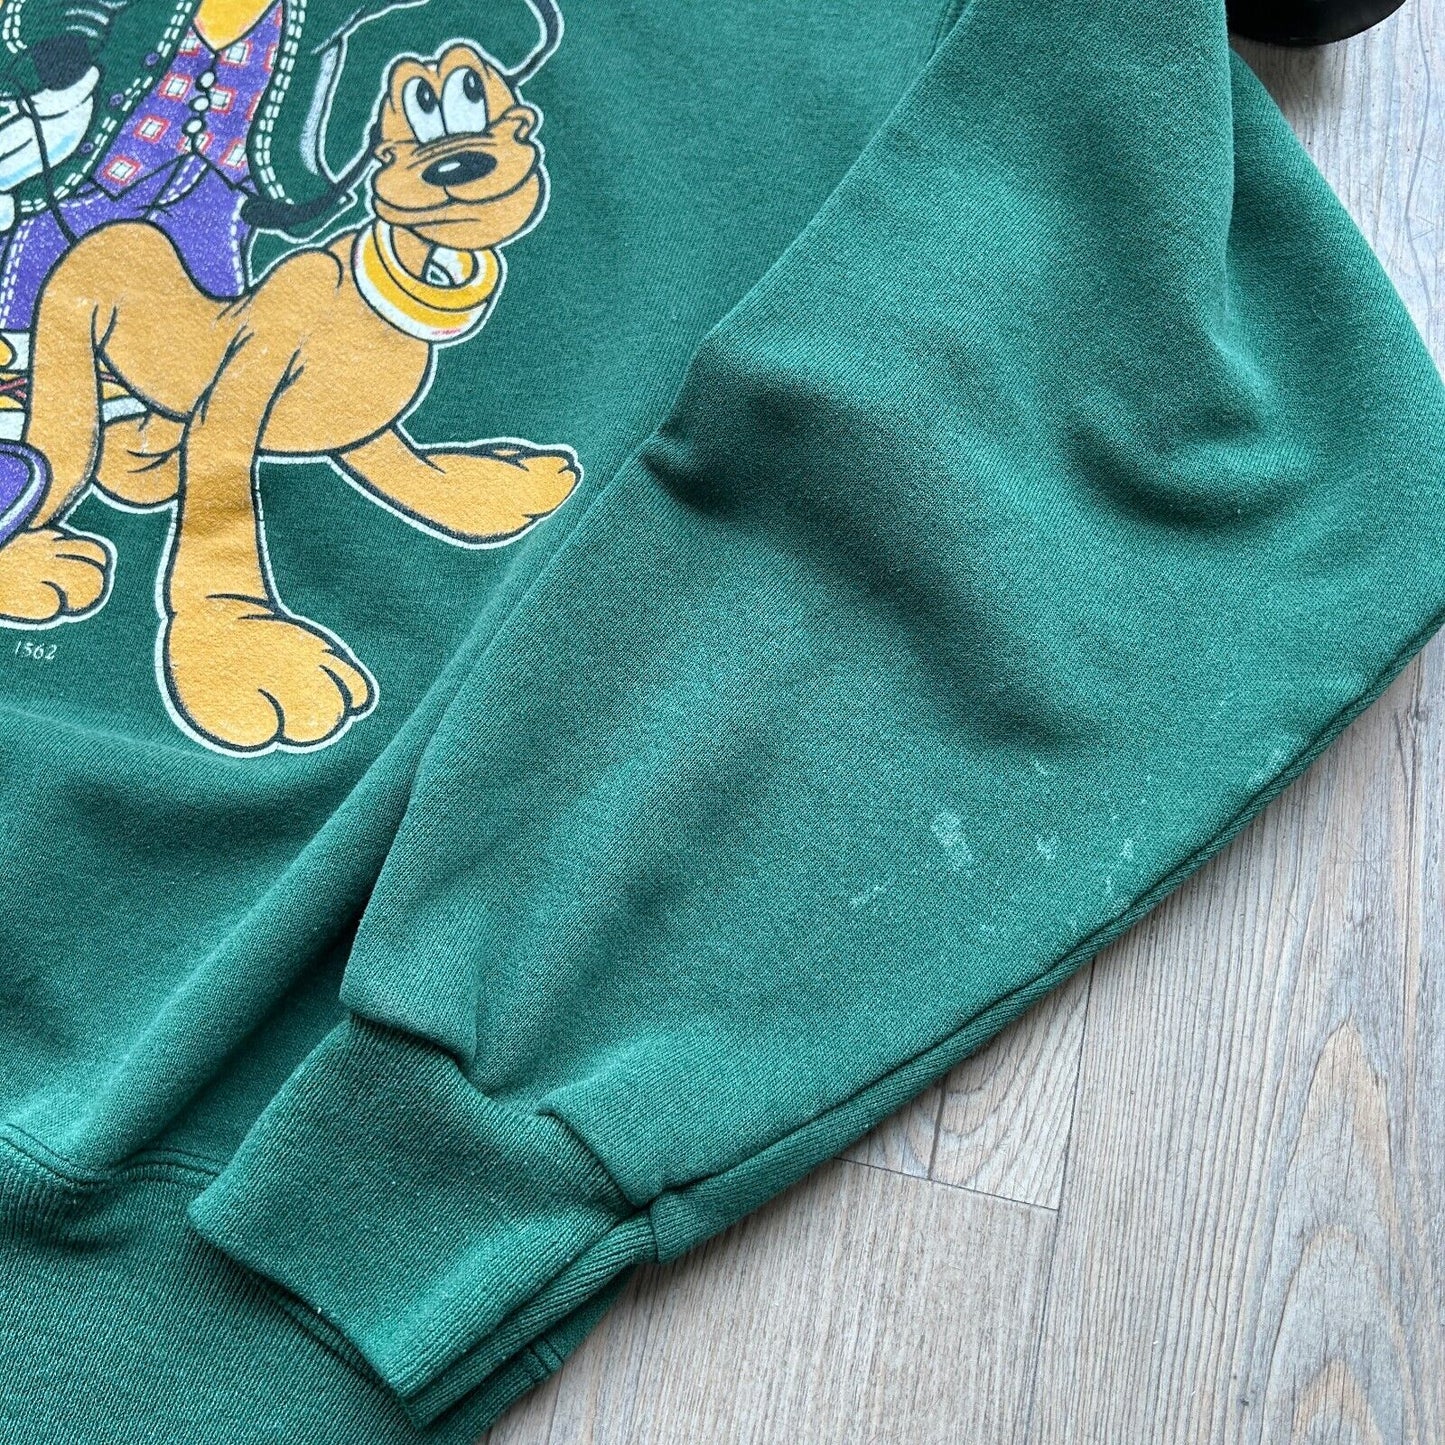 VINTAGE 90s | Mickey Mouse Donald Duck Pluto Cartoon Sweater sz L Adult